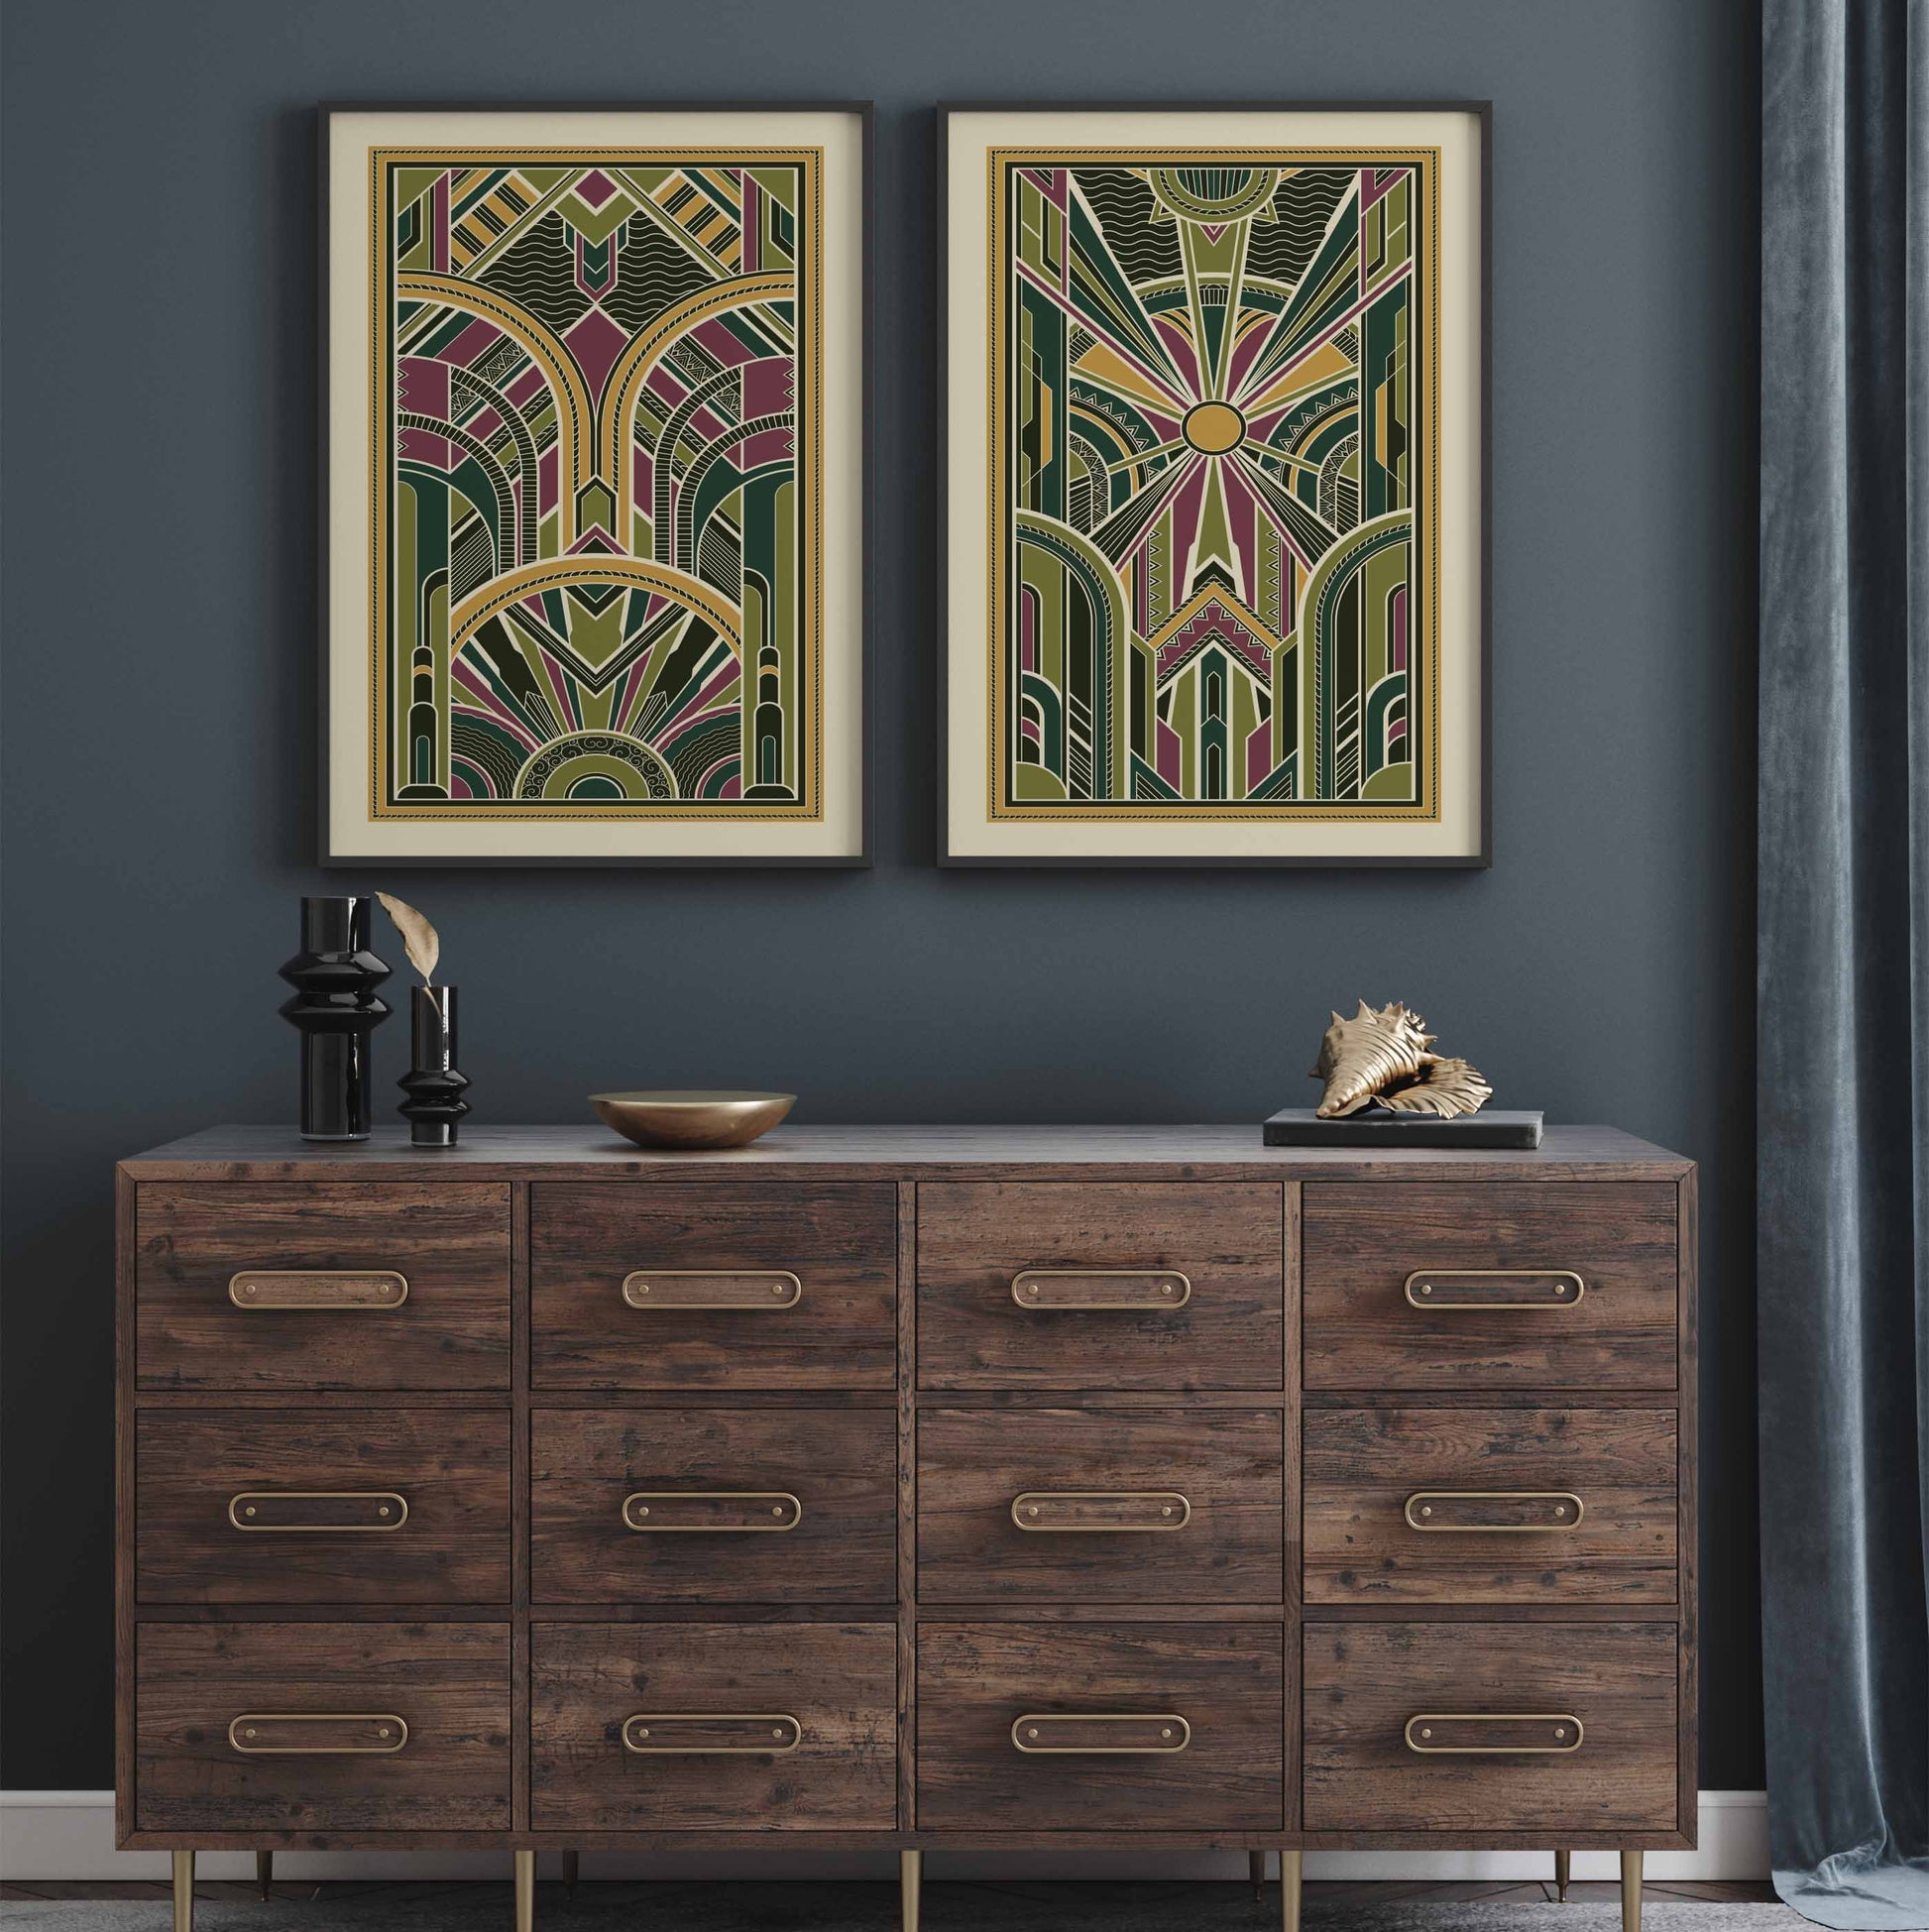 Geometric art deco posters in a rich green and gold colour scheme